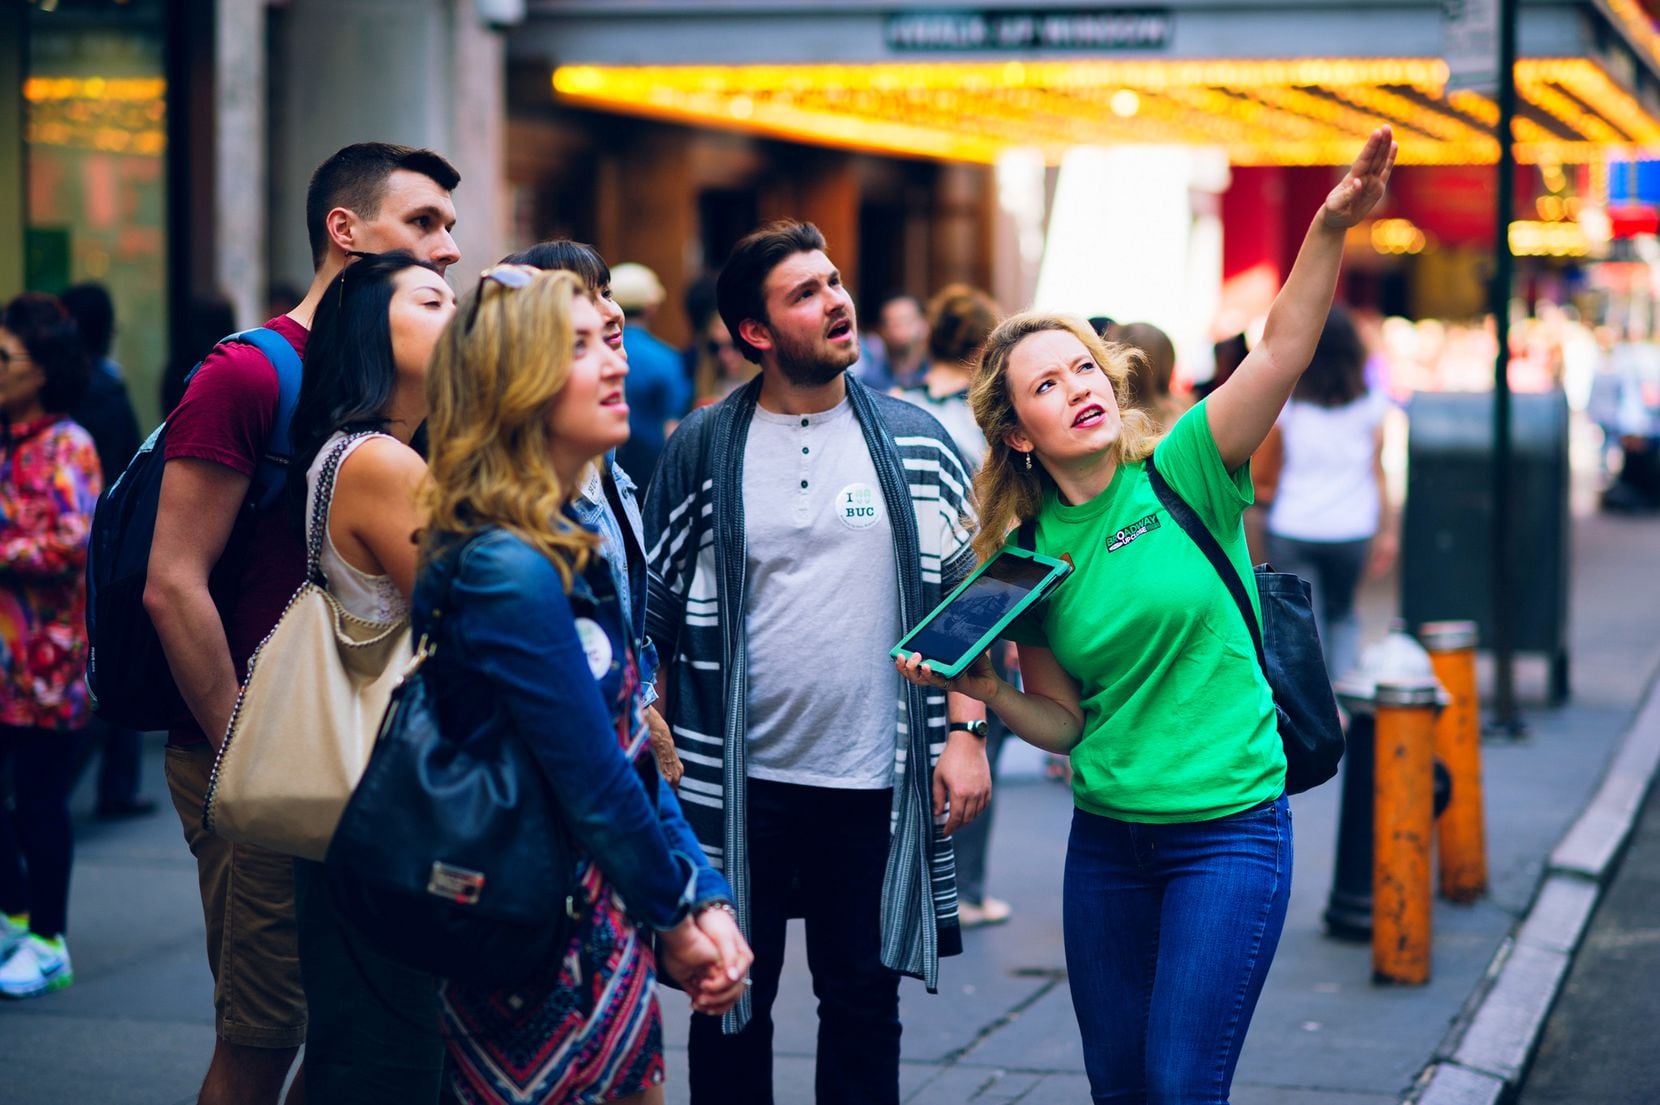 The green-clad guides for the Broadway Up Close tour company carry an iPad filled with...